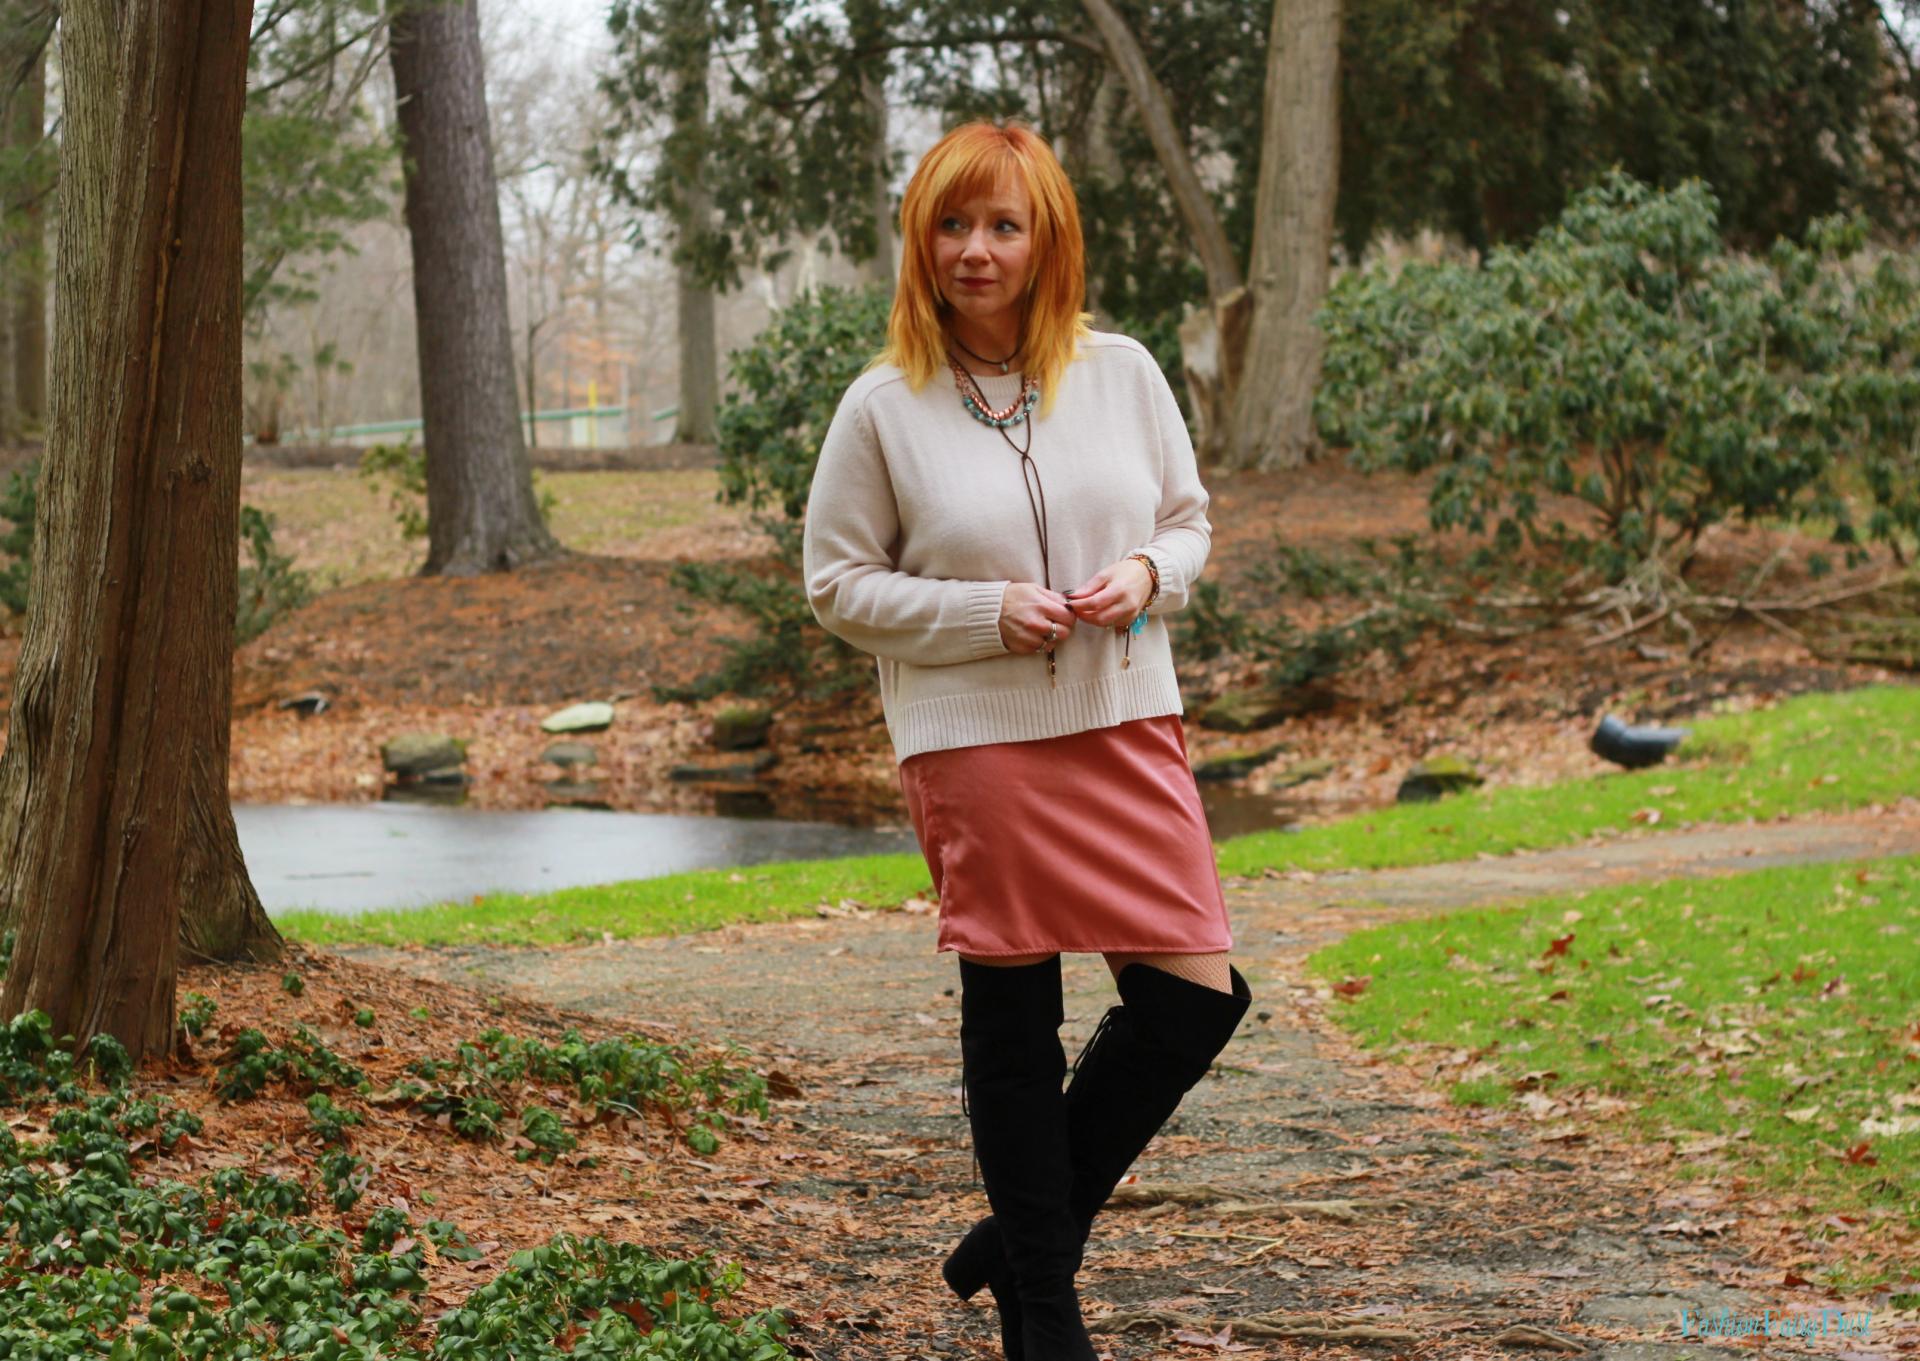 Pink slip dress, otk boots and sweater. Adding pops of color to an outfit.